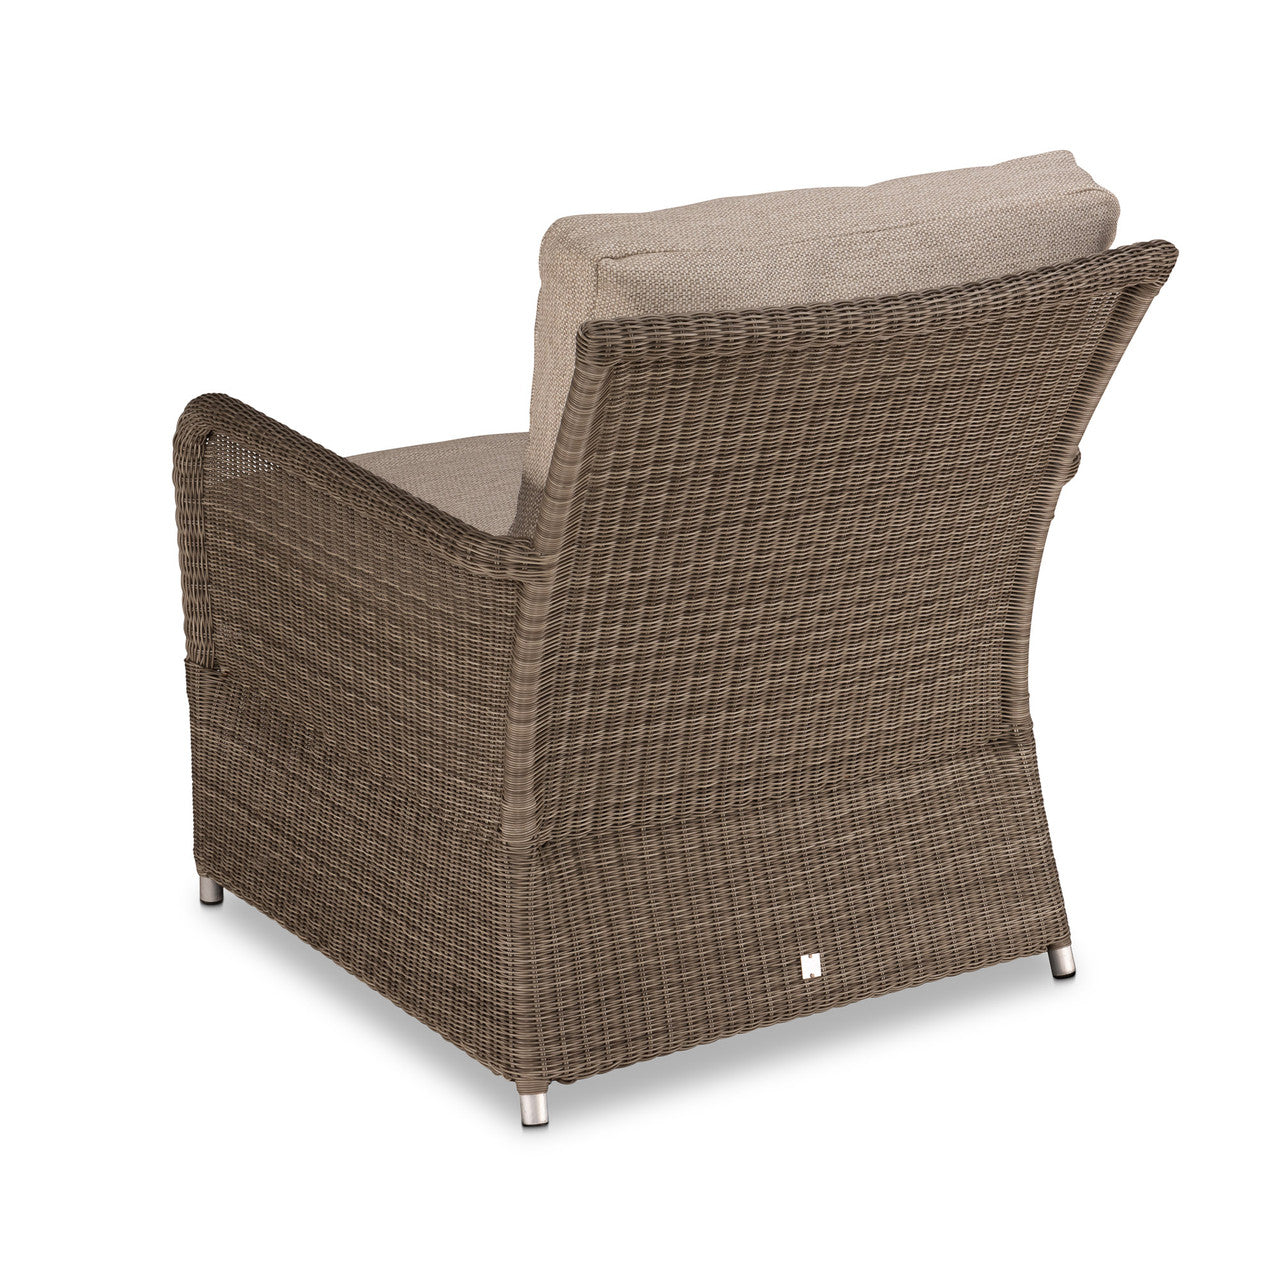 CO9 Design - Savannah White Coral Wicker Club Chair with Dune Cushions | [SV30GRCUSSV30GR]